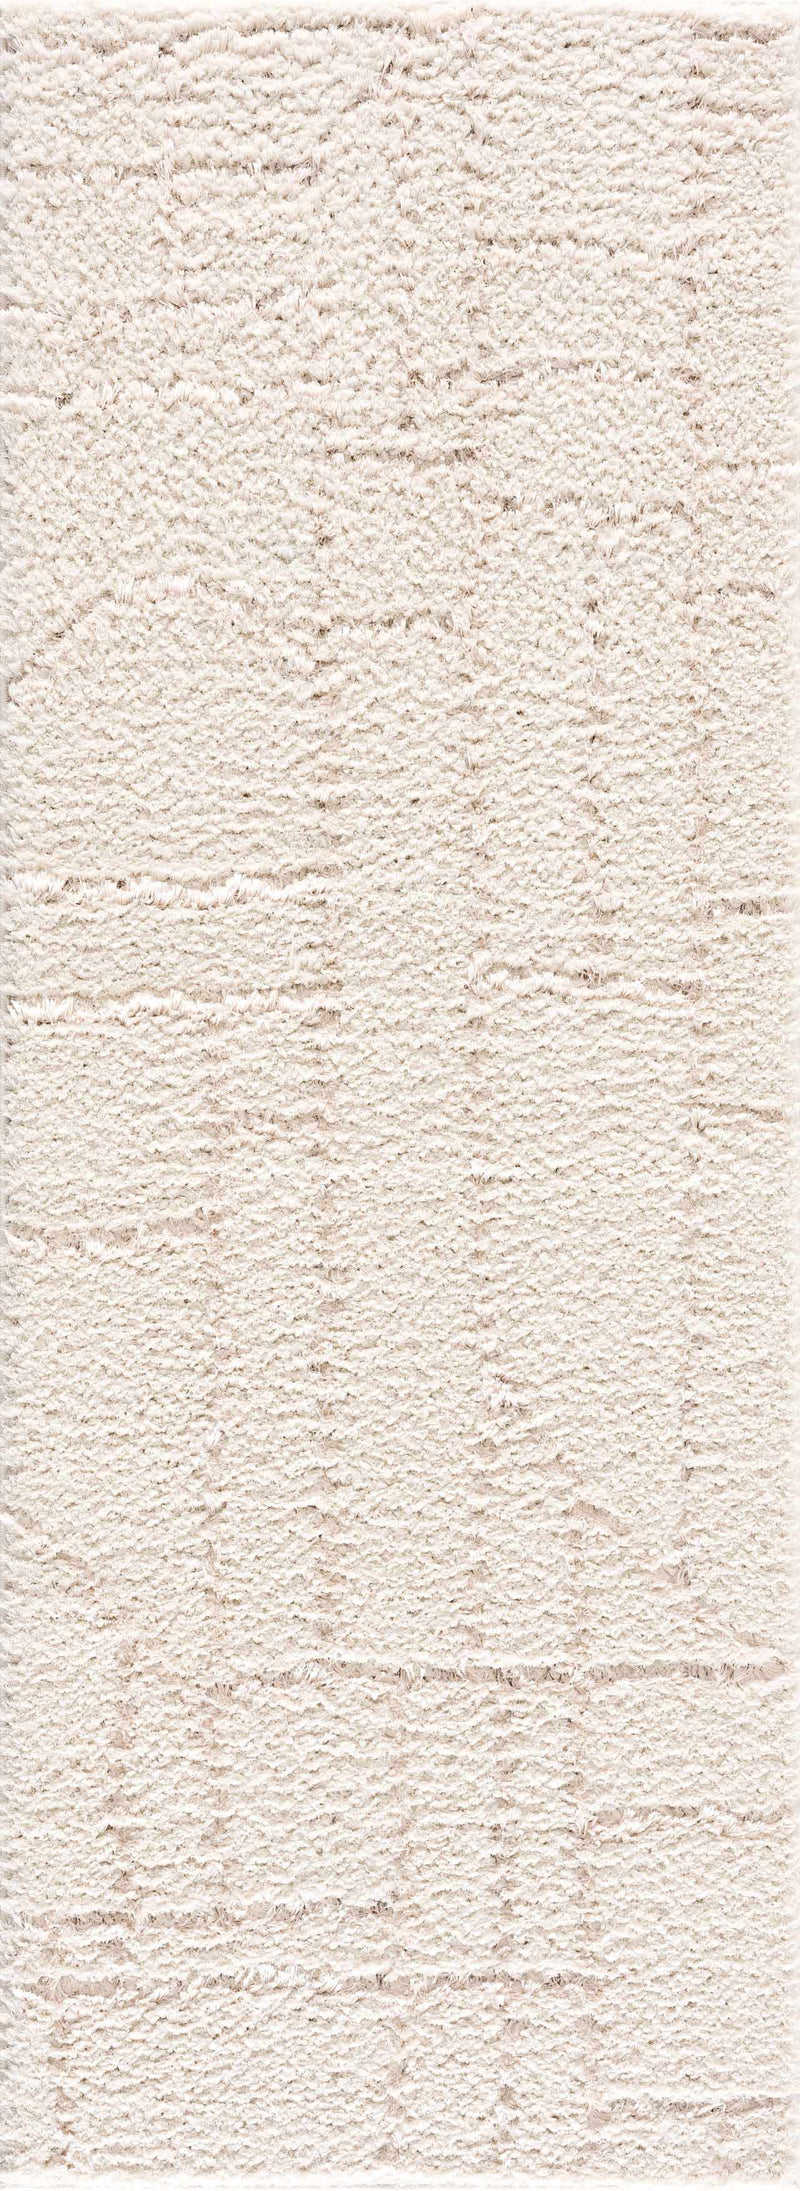 Boutique Rugs - Andia Cream Area Rug Rugs Boutique Rugs 2'7" x 7'3" Runner 